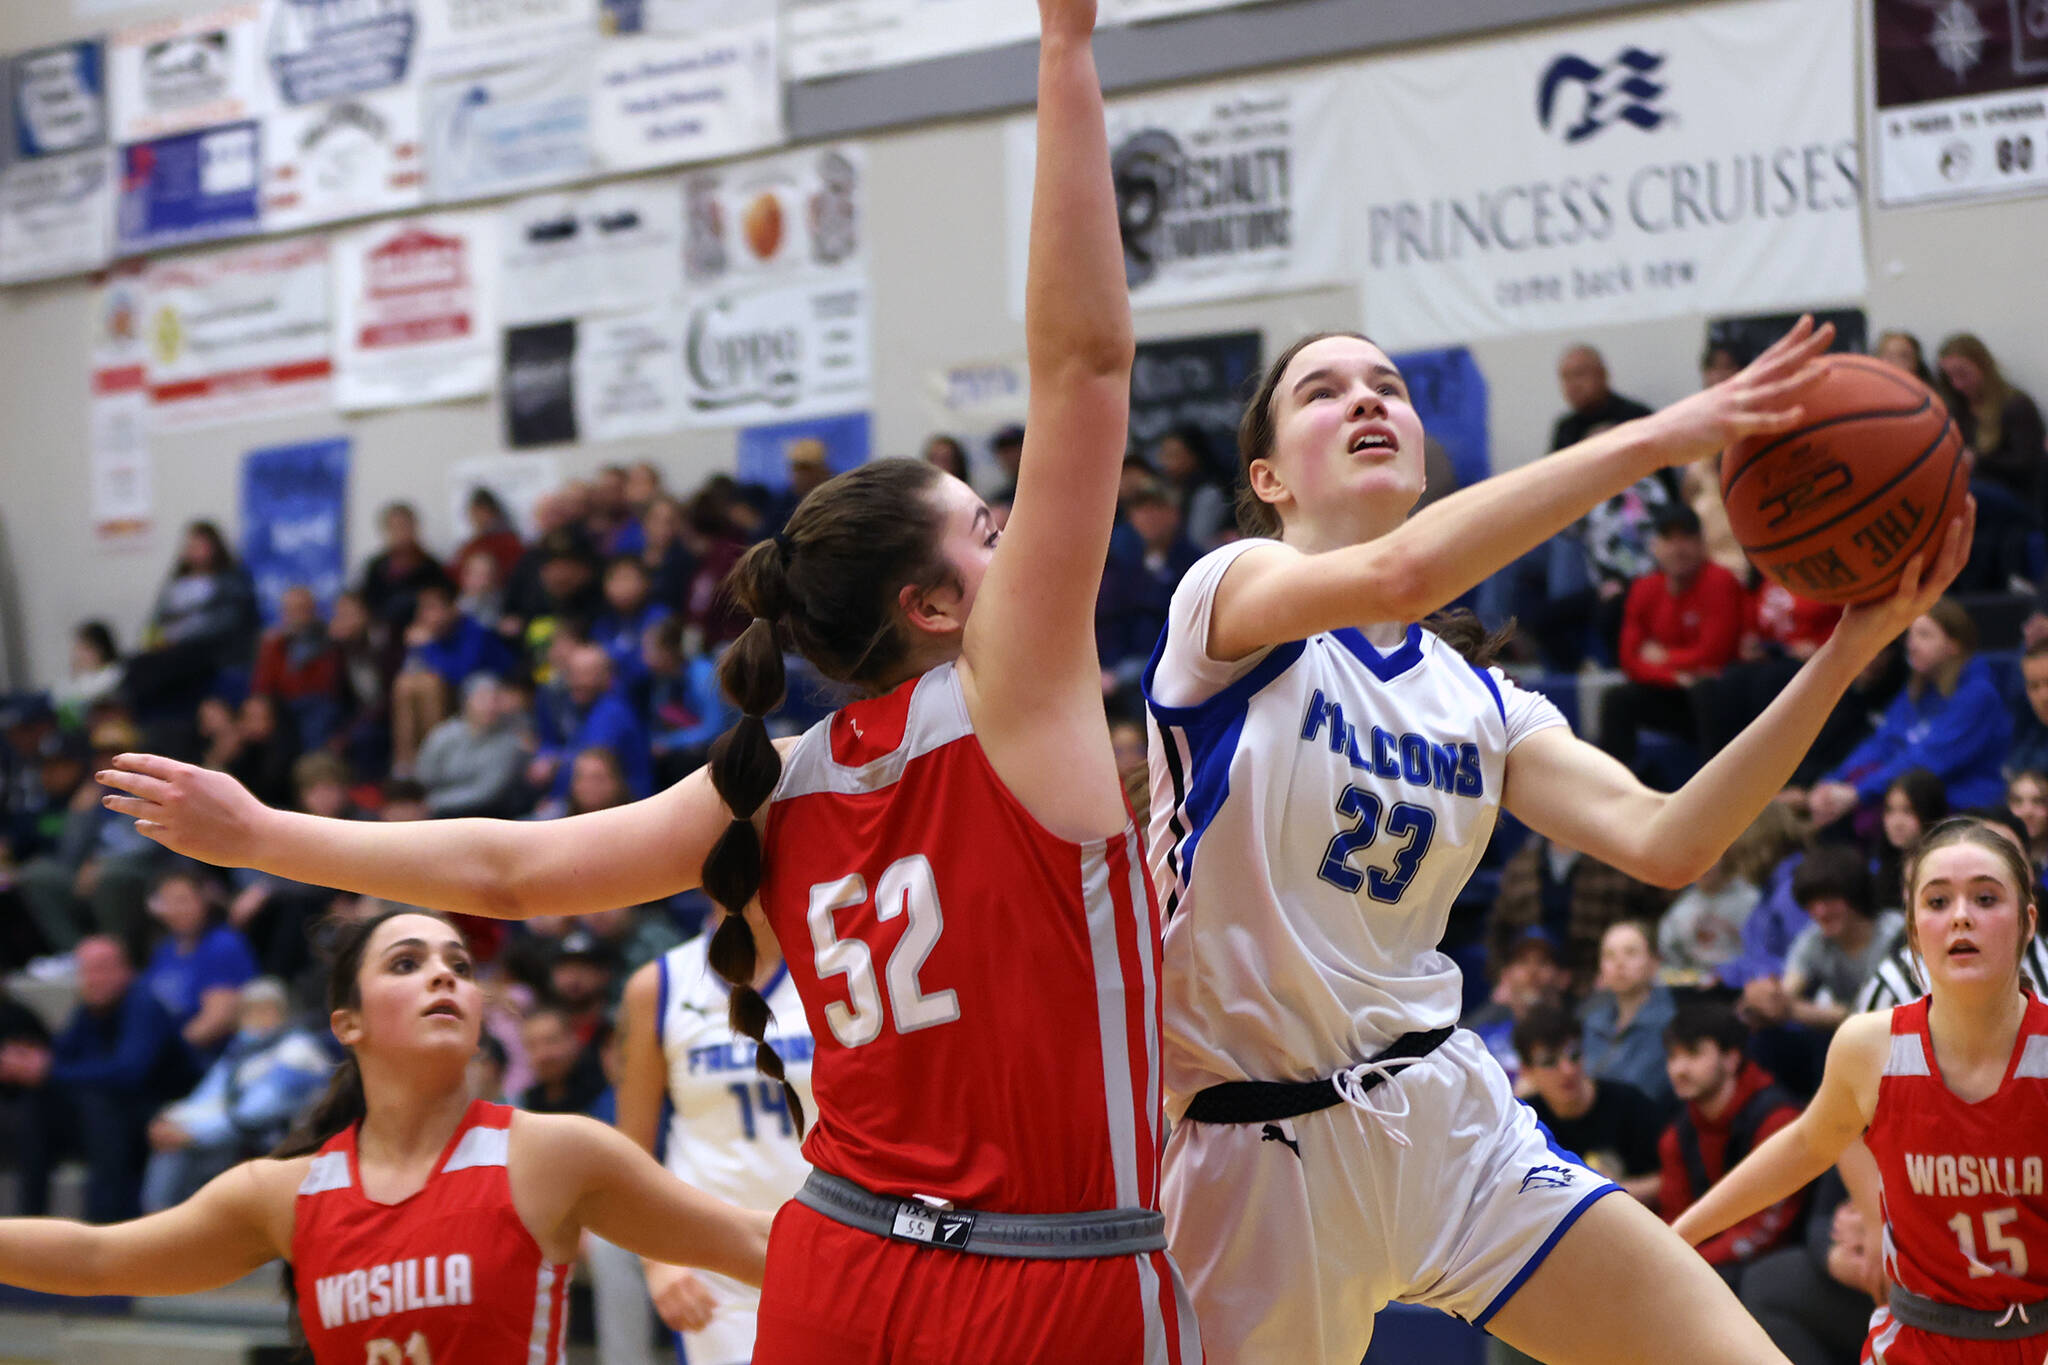 TMHS sophomore Cailynn Baxter (23) attempts to maneuver around the outstretched arm of Wasilla sophomore Layla Hays (52). (Ben Hohenstatt / Juneau Empire)